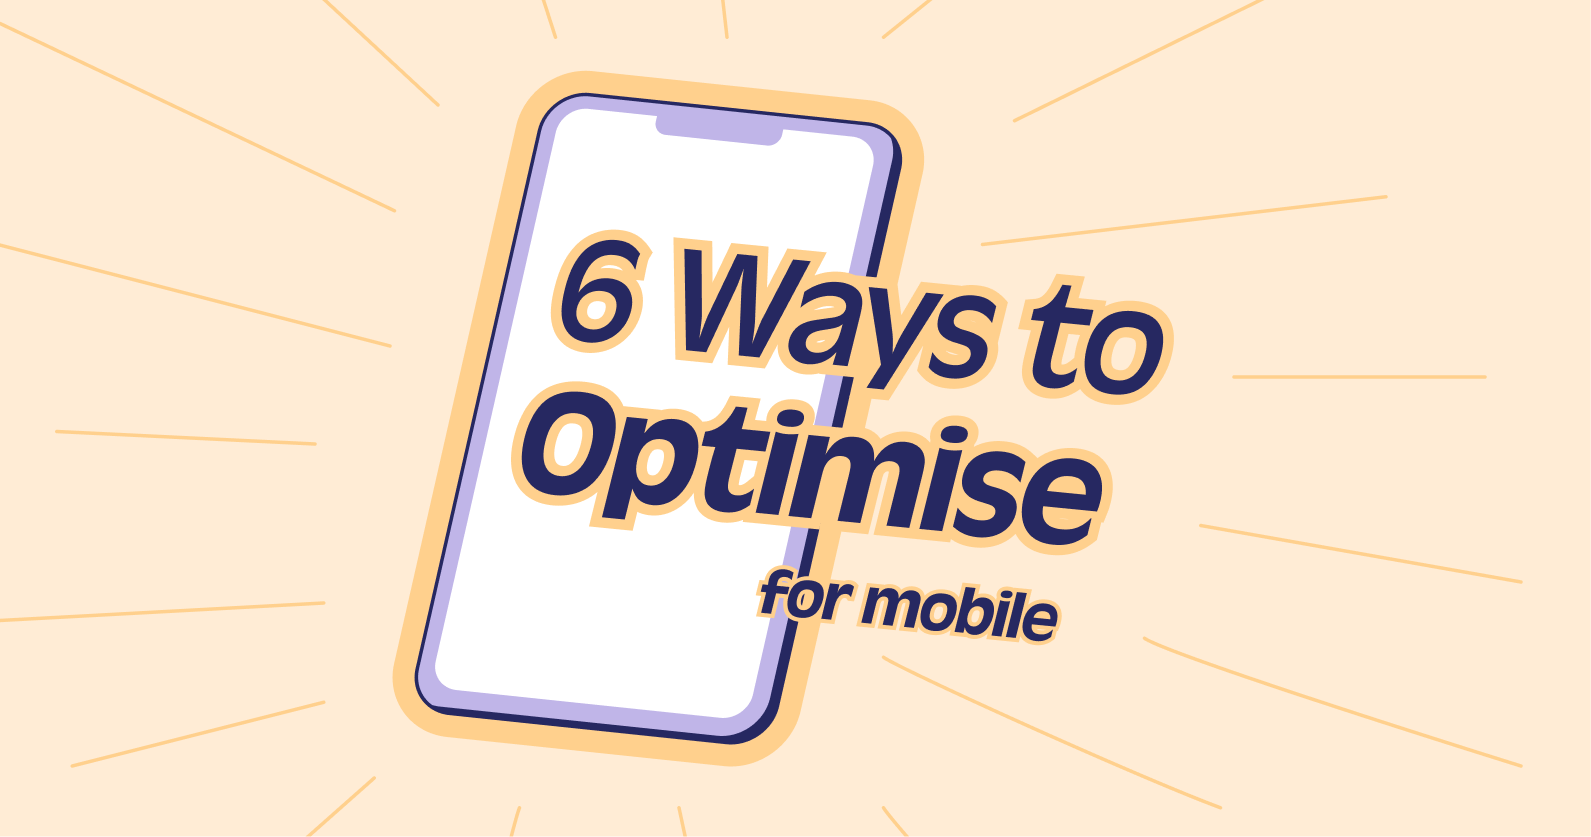 6 way to optimise for mobile.